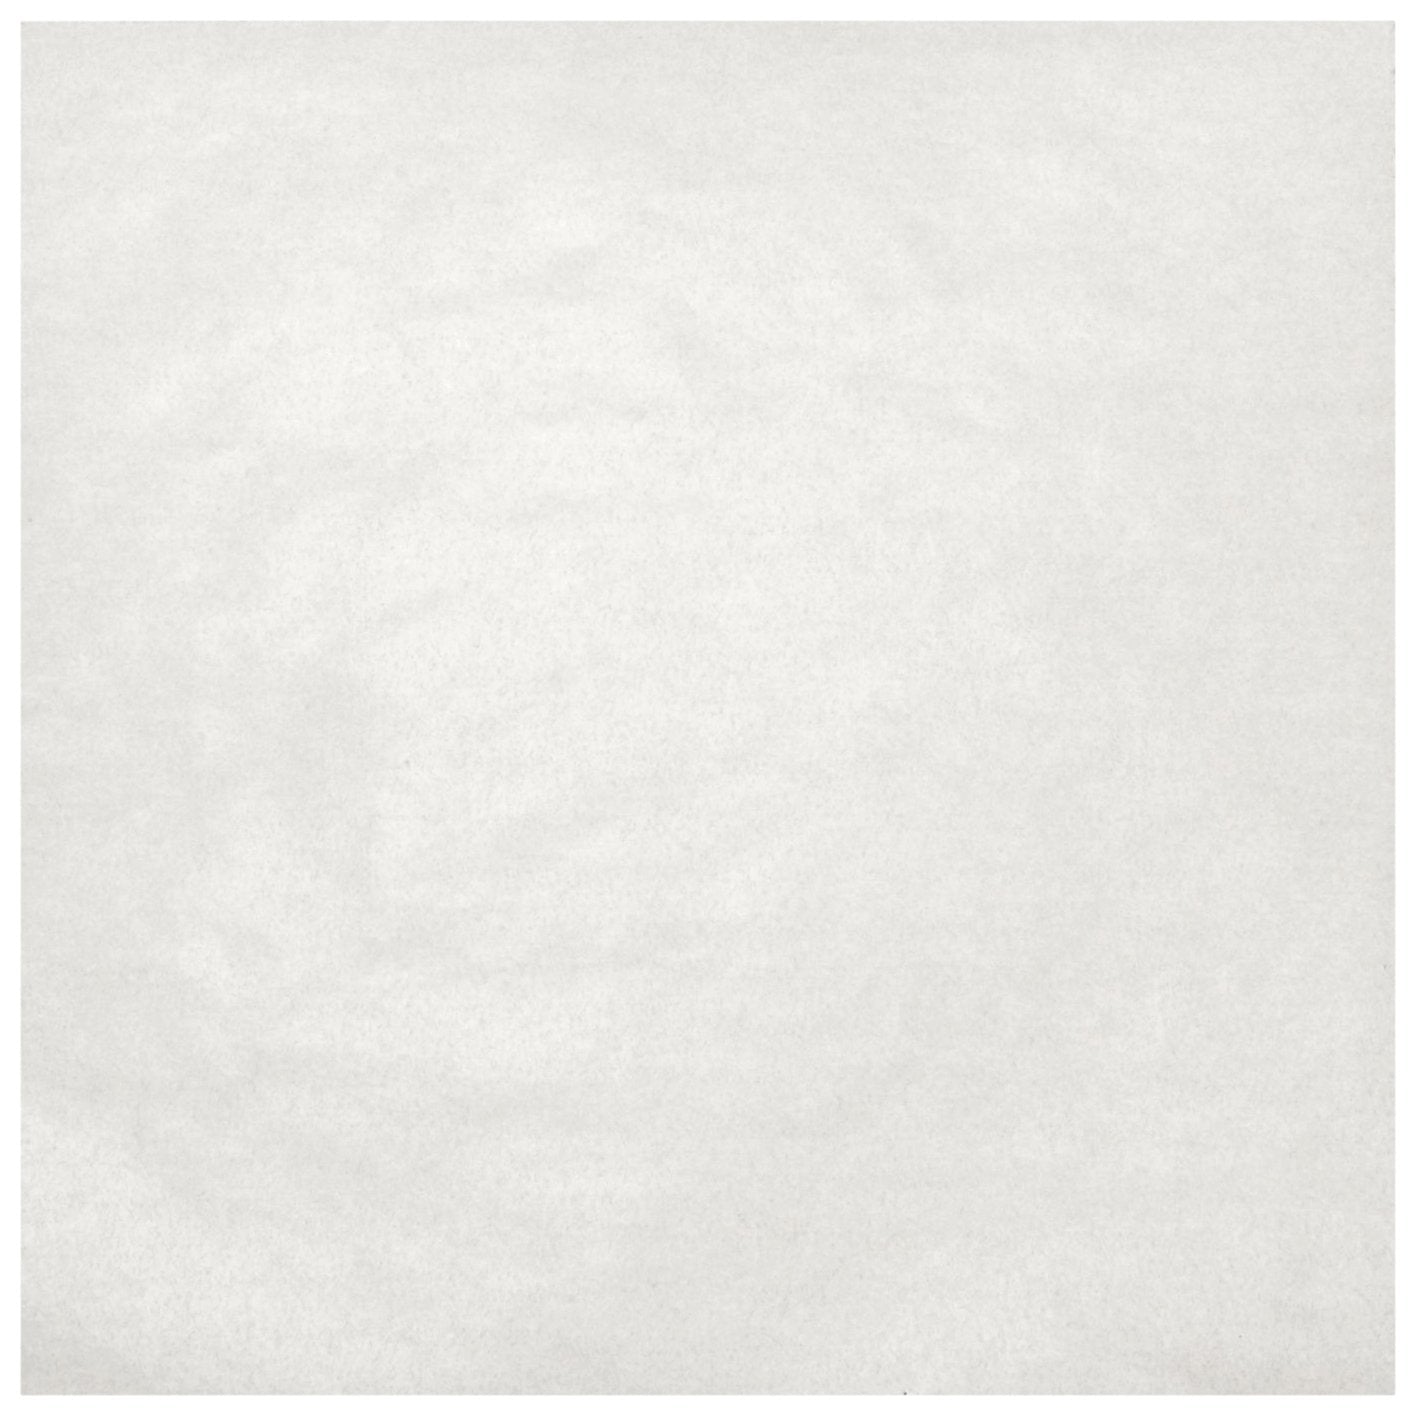 Whatman 10347893 Weighing Papers, Sheets, 100mm x 100mm, Grade 2122, 500/pk